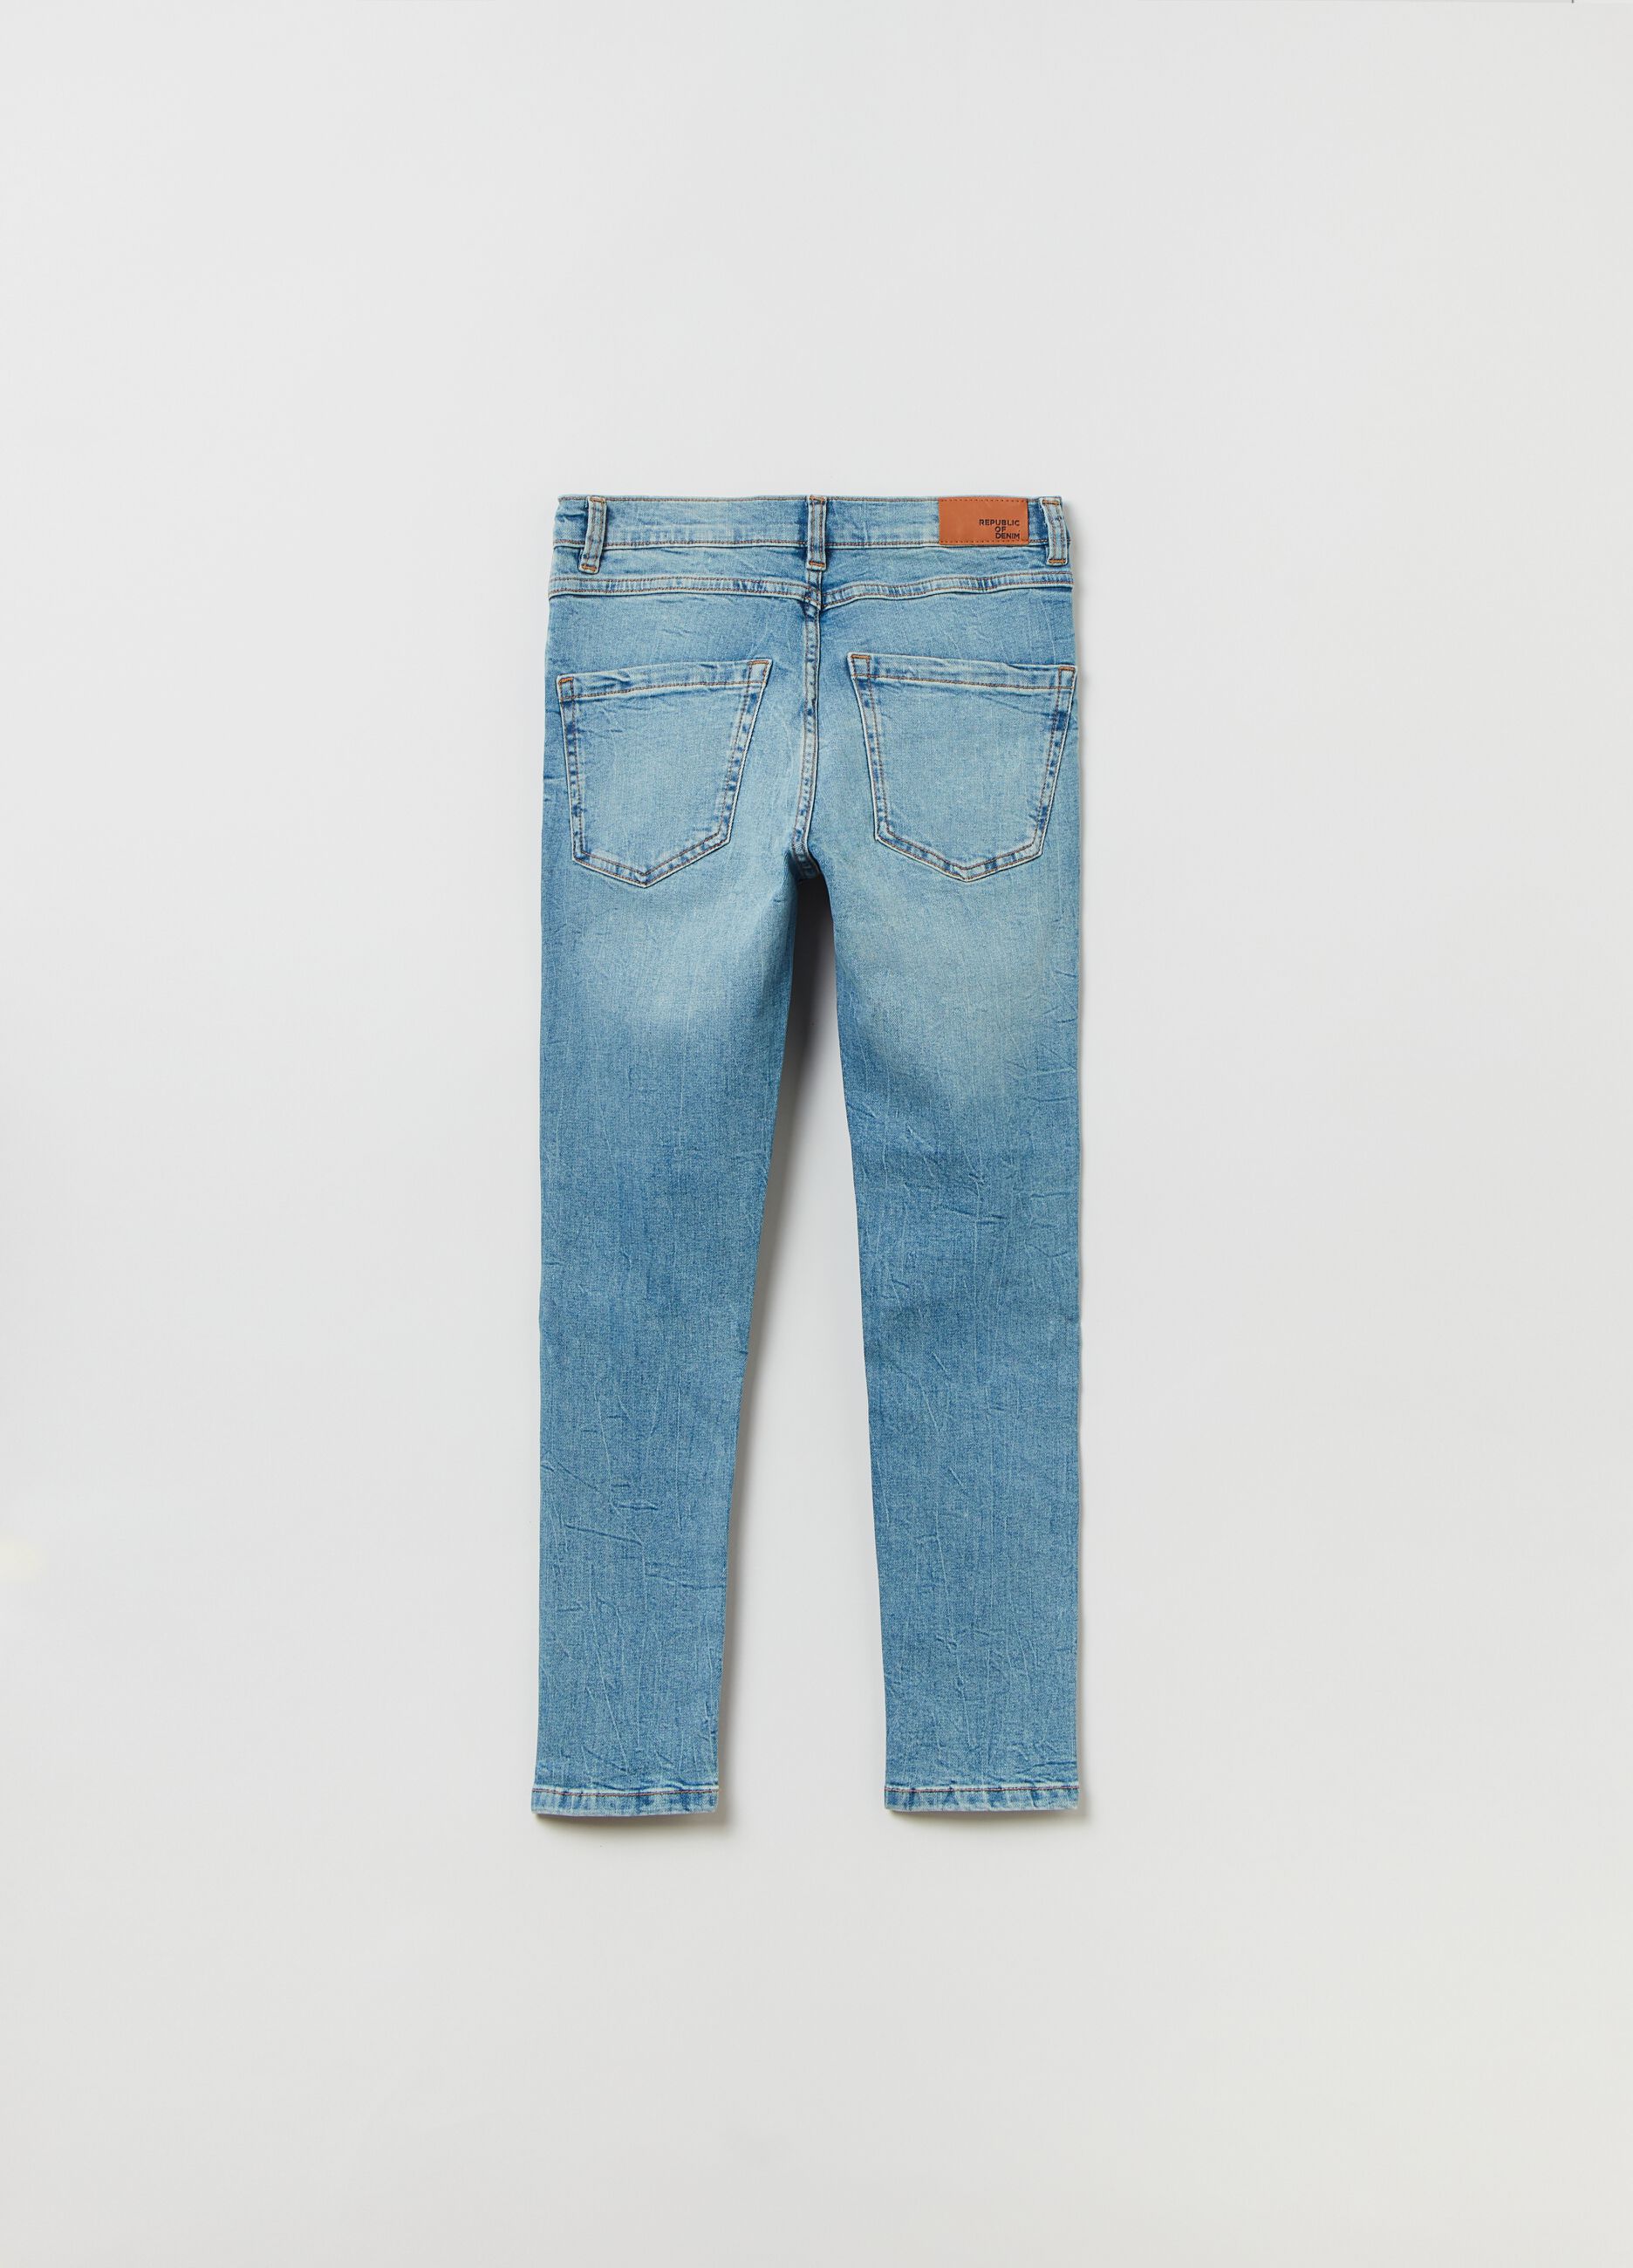 Carrot-fit jeans with rips